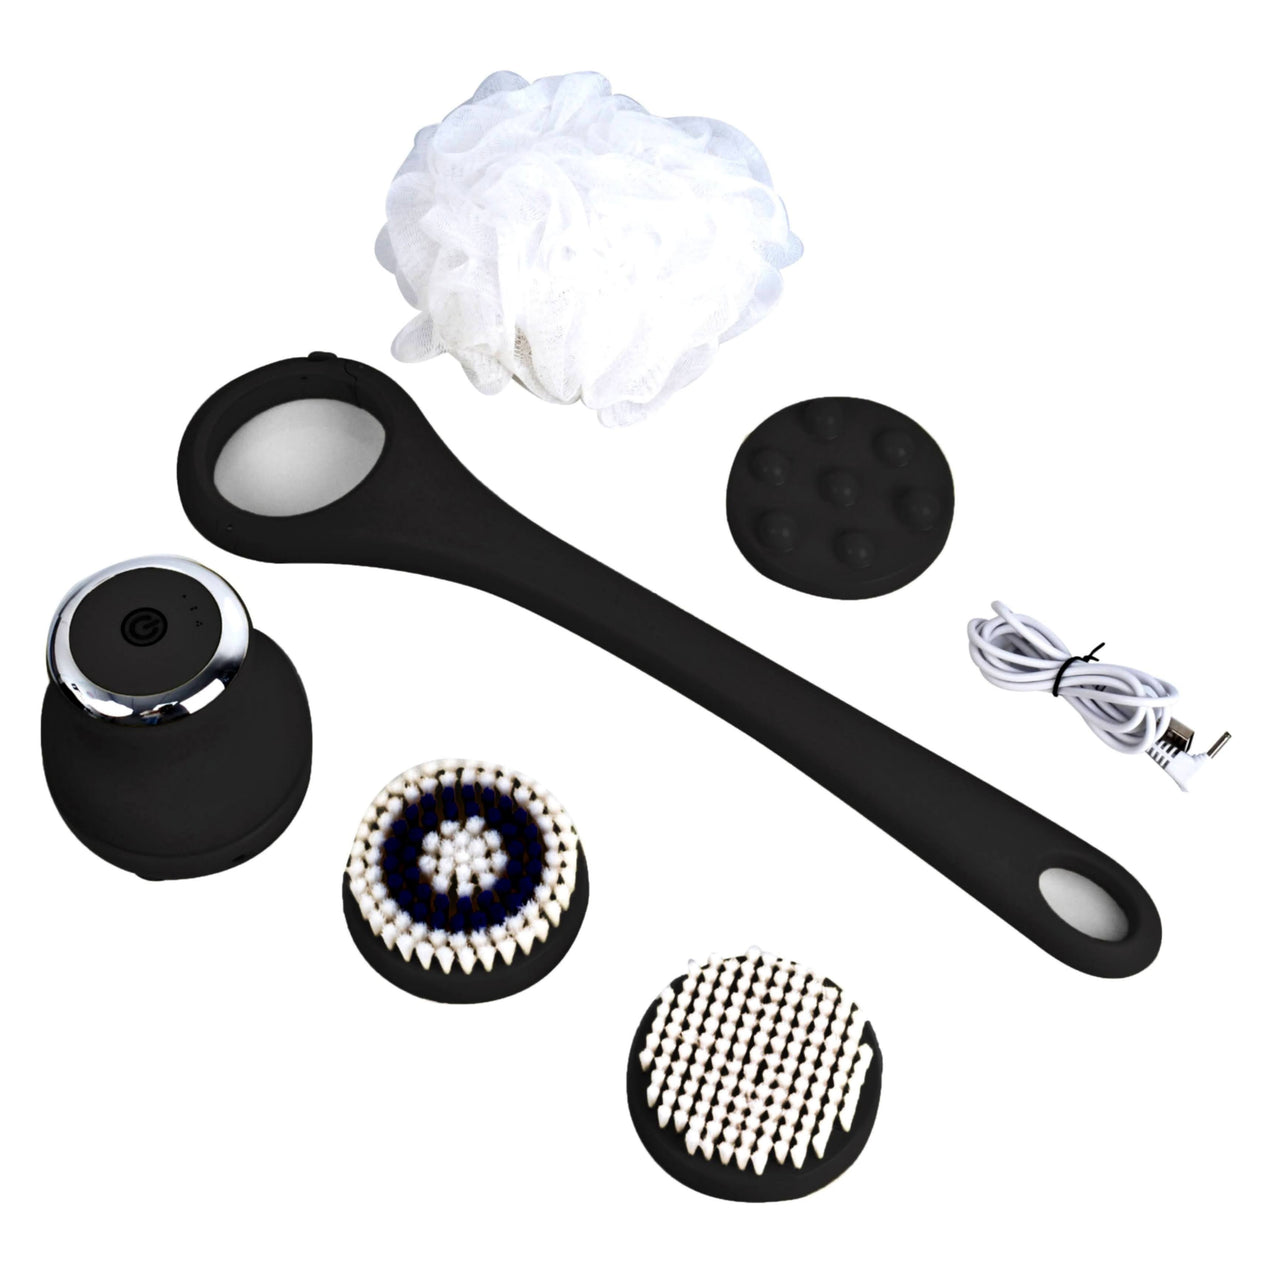 Wireless Waterproof Cleansing and Exfoliating Body Brush Set with 3 Speed 4 Brush Heads Matte Black